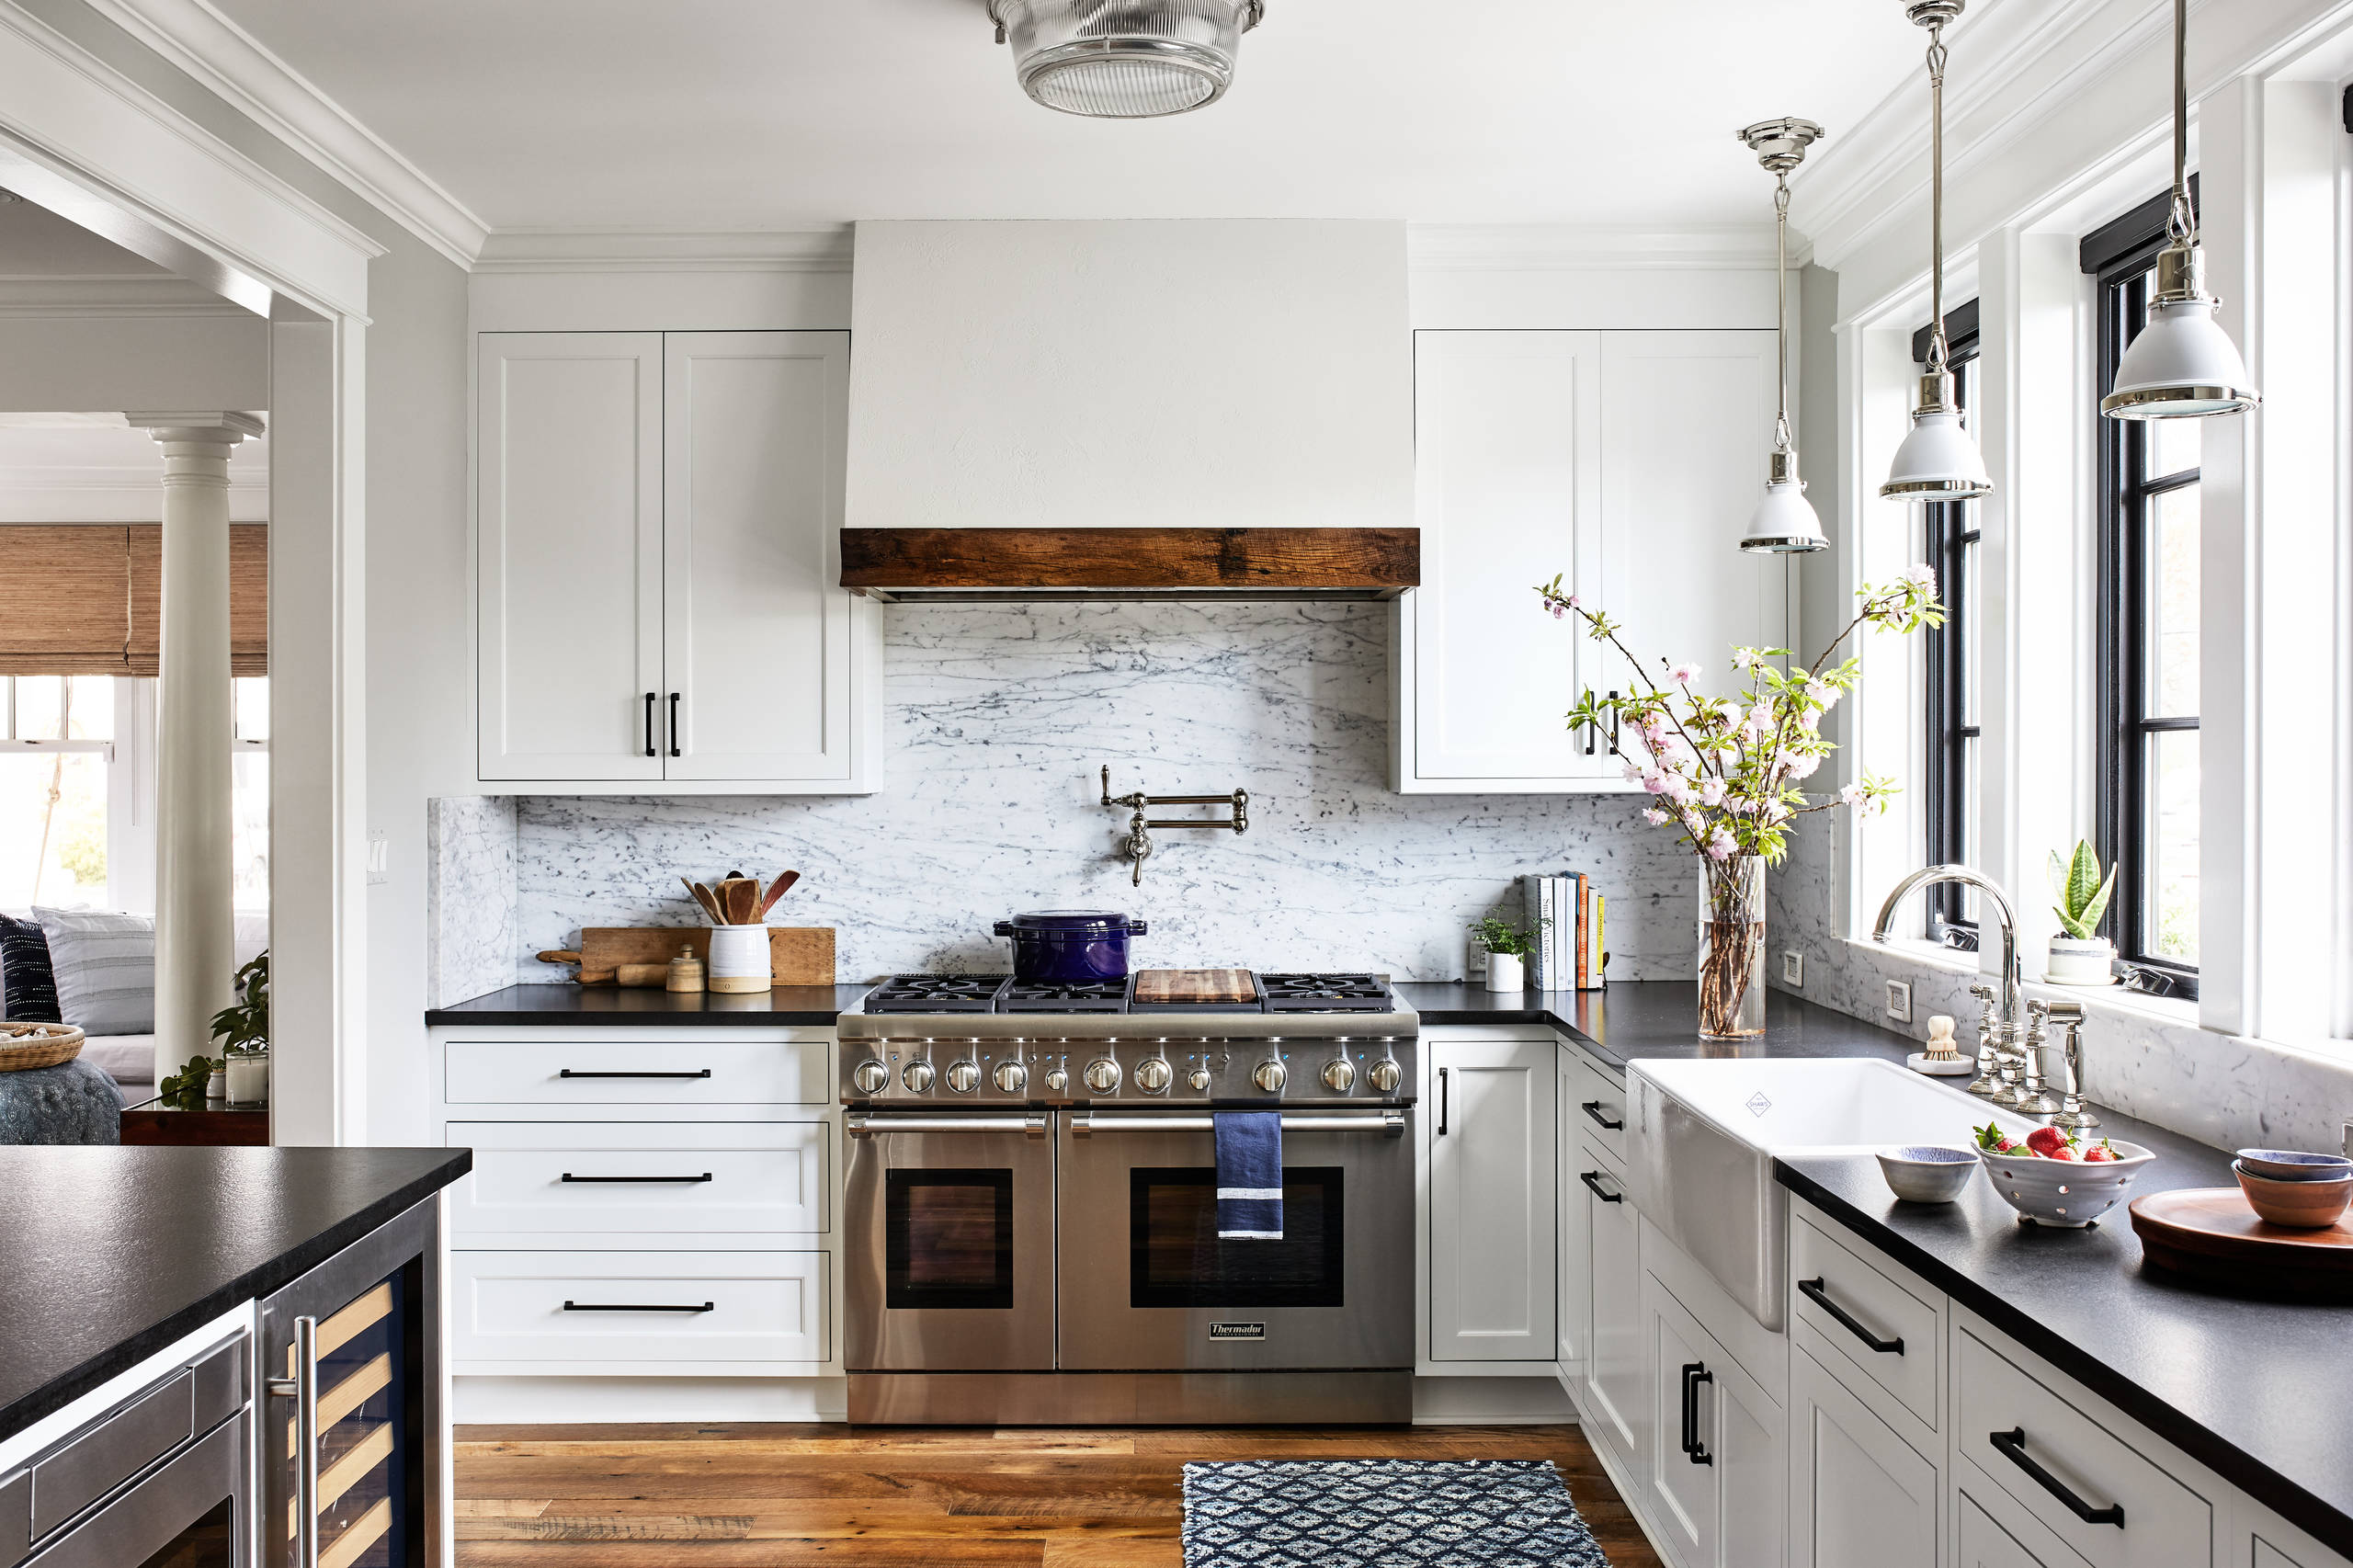 White Cabinets With Black Countertops, White Cabinets With White Countertops